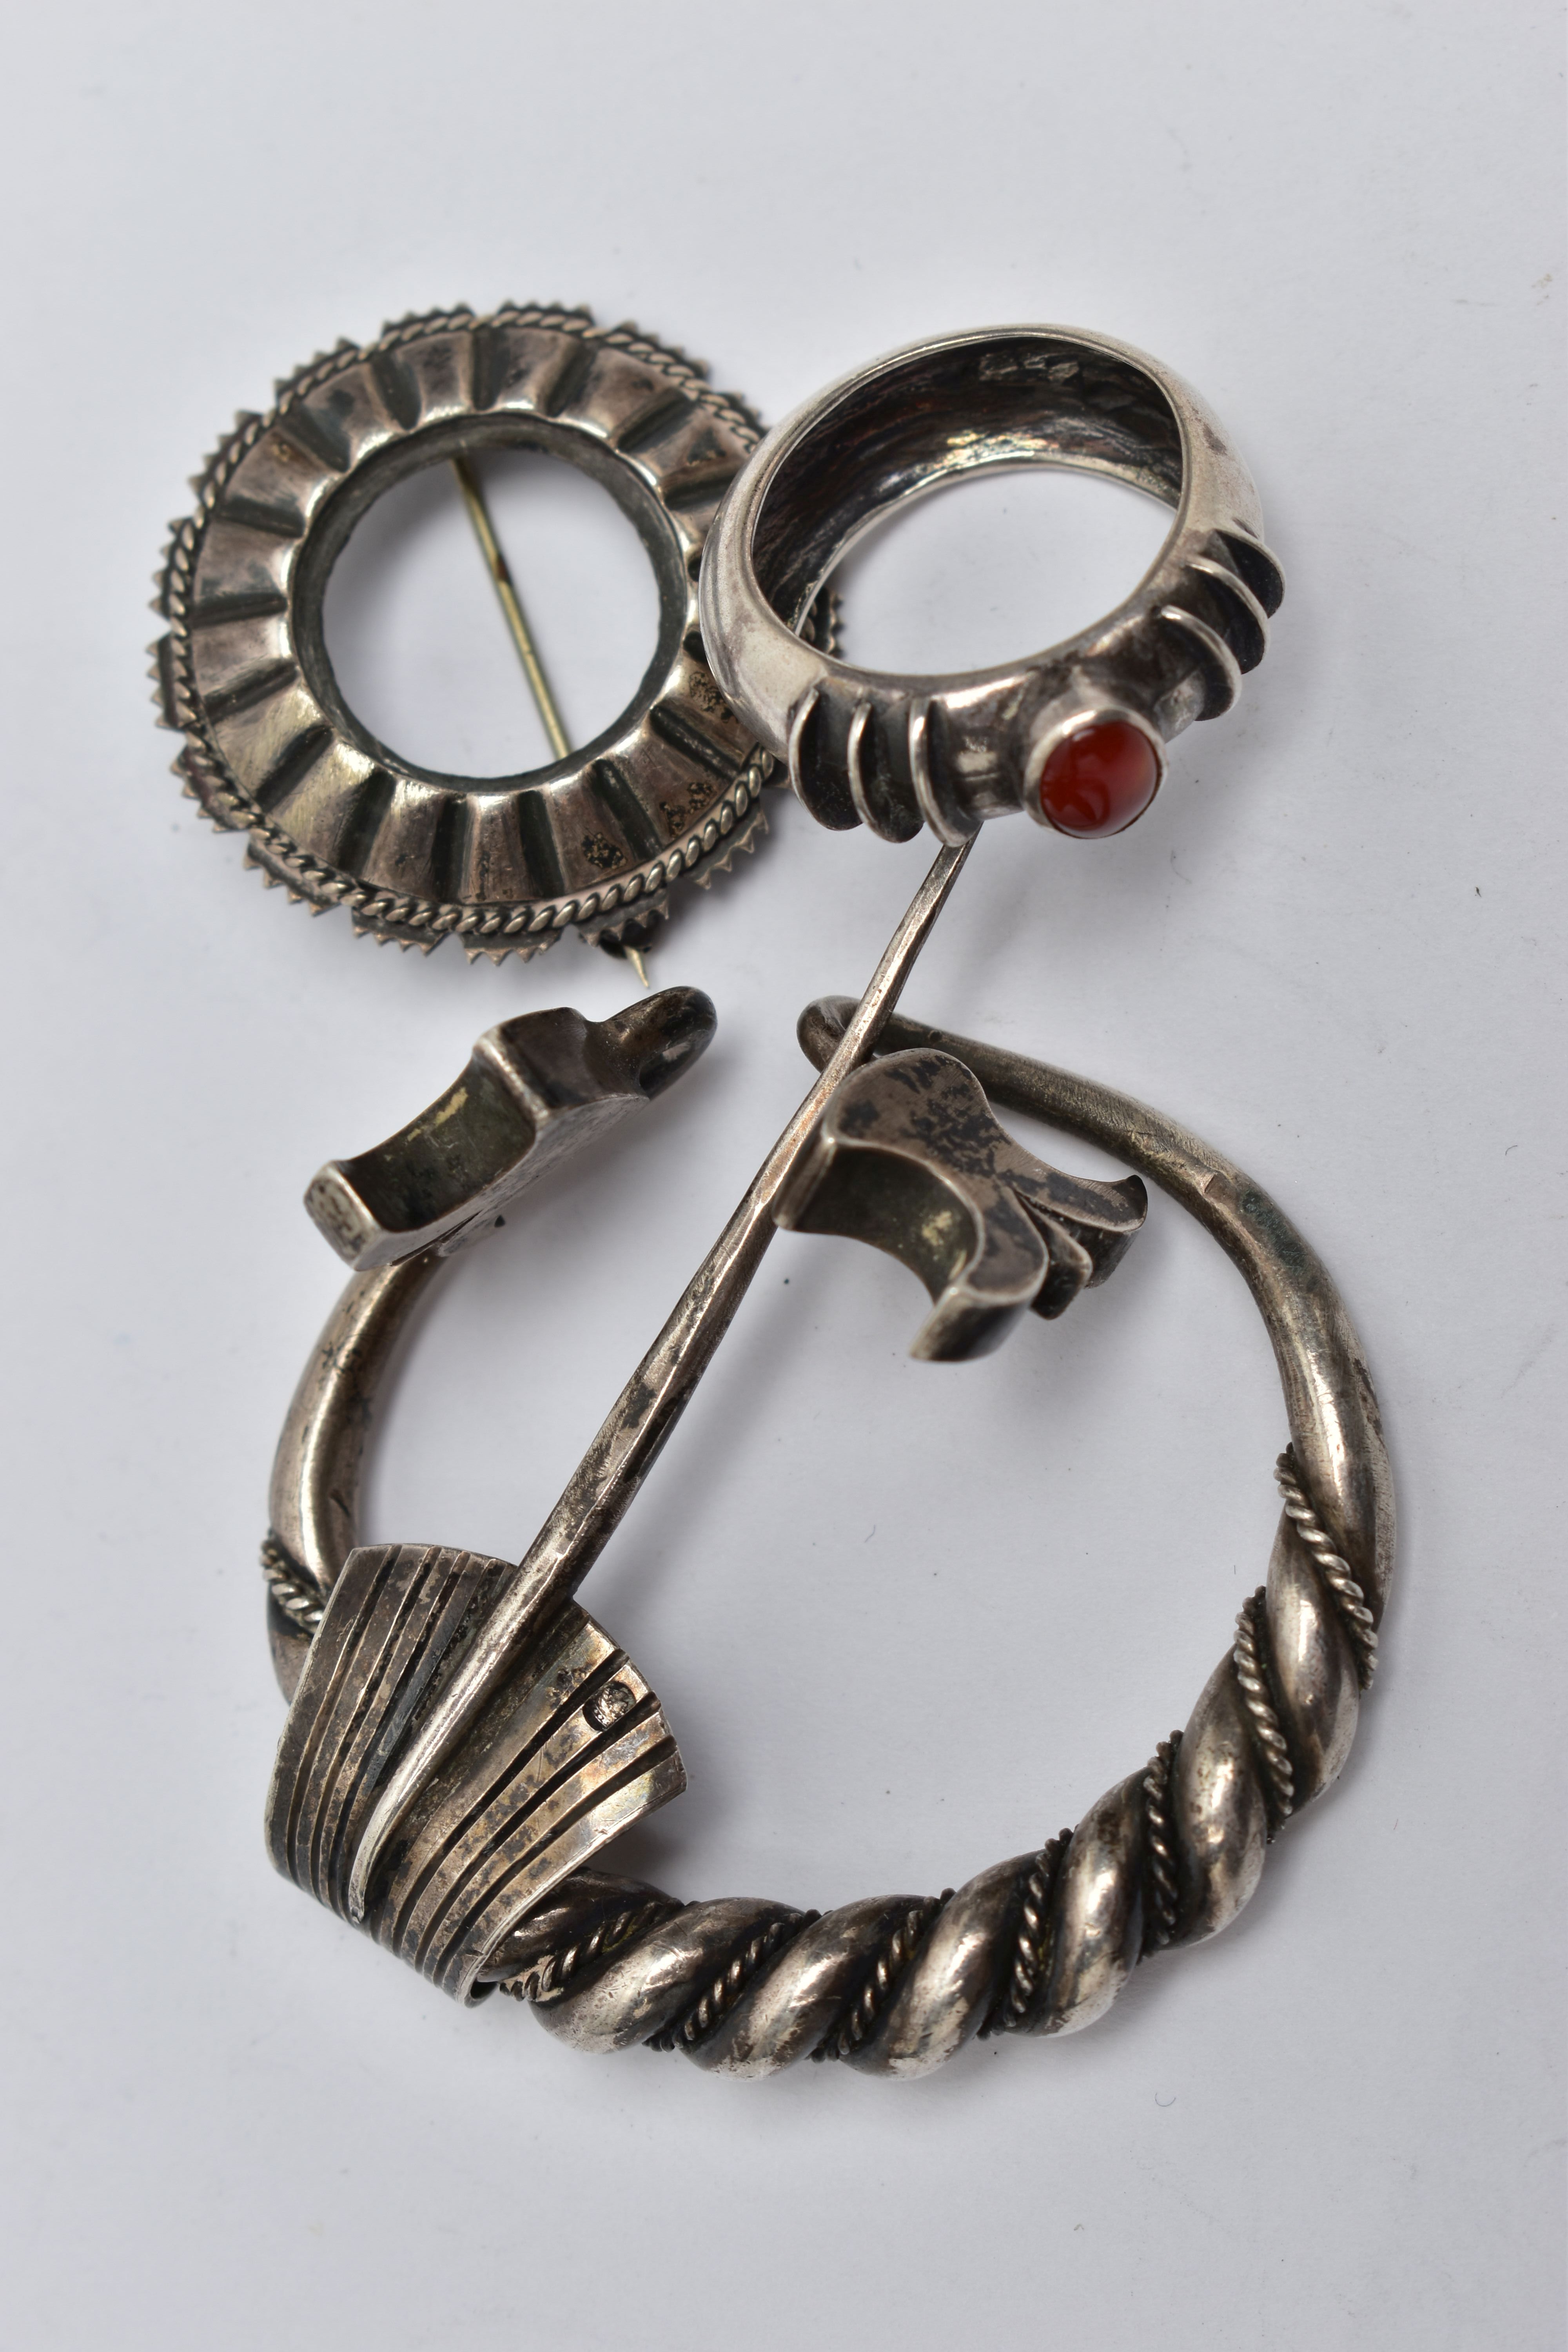 A CLOAK CLIP, BROOCH AND A RING, the white metal cloak clip of a circular form, featuring rope twist